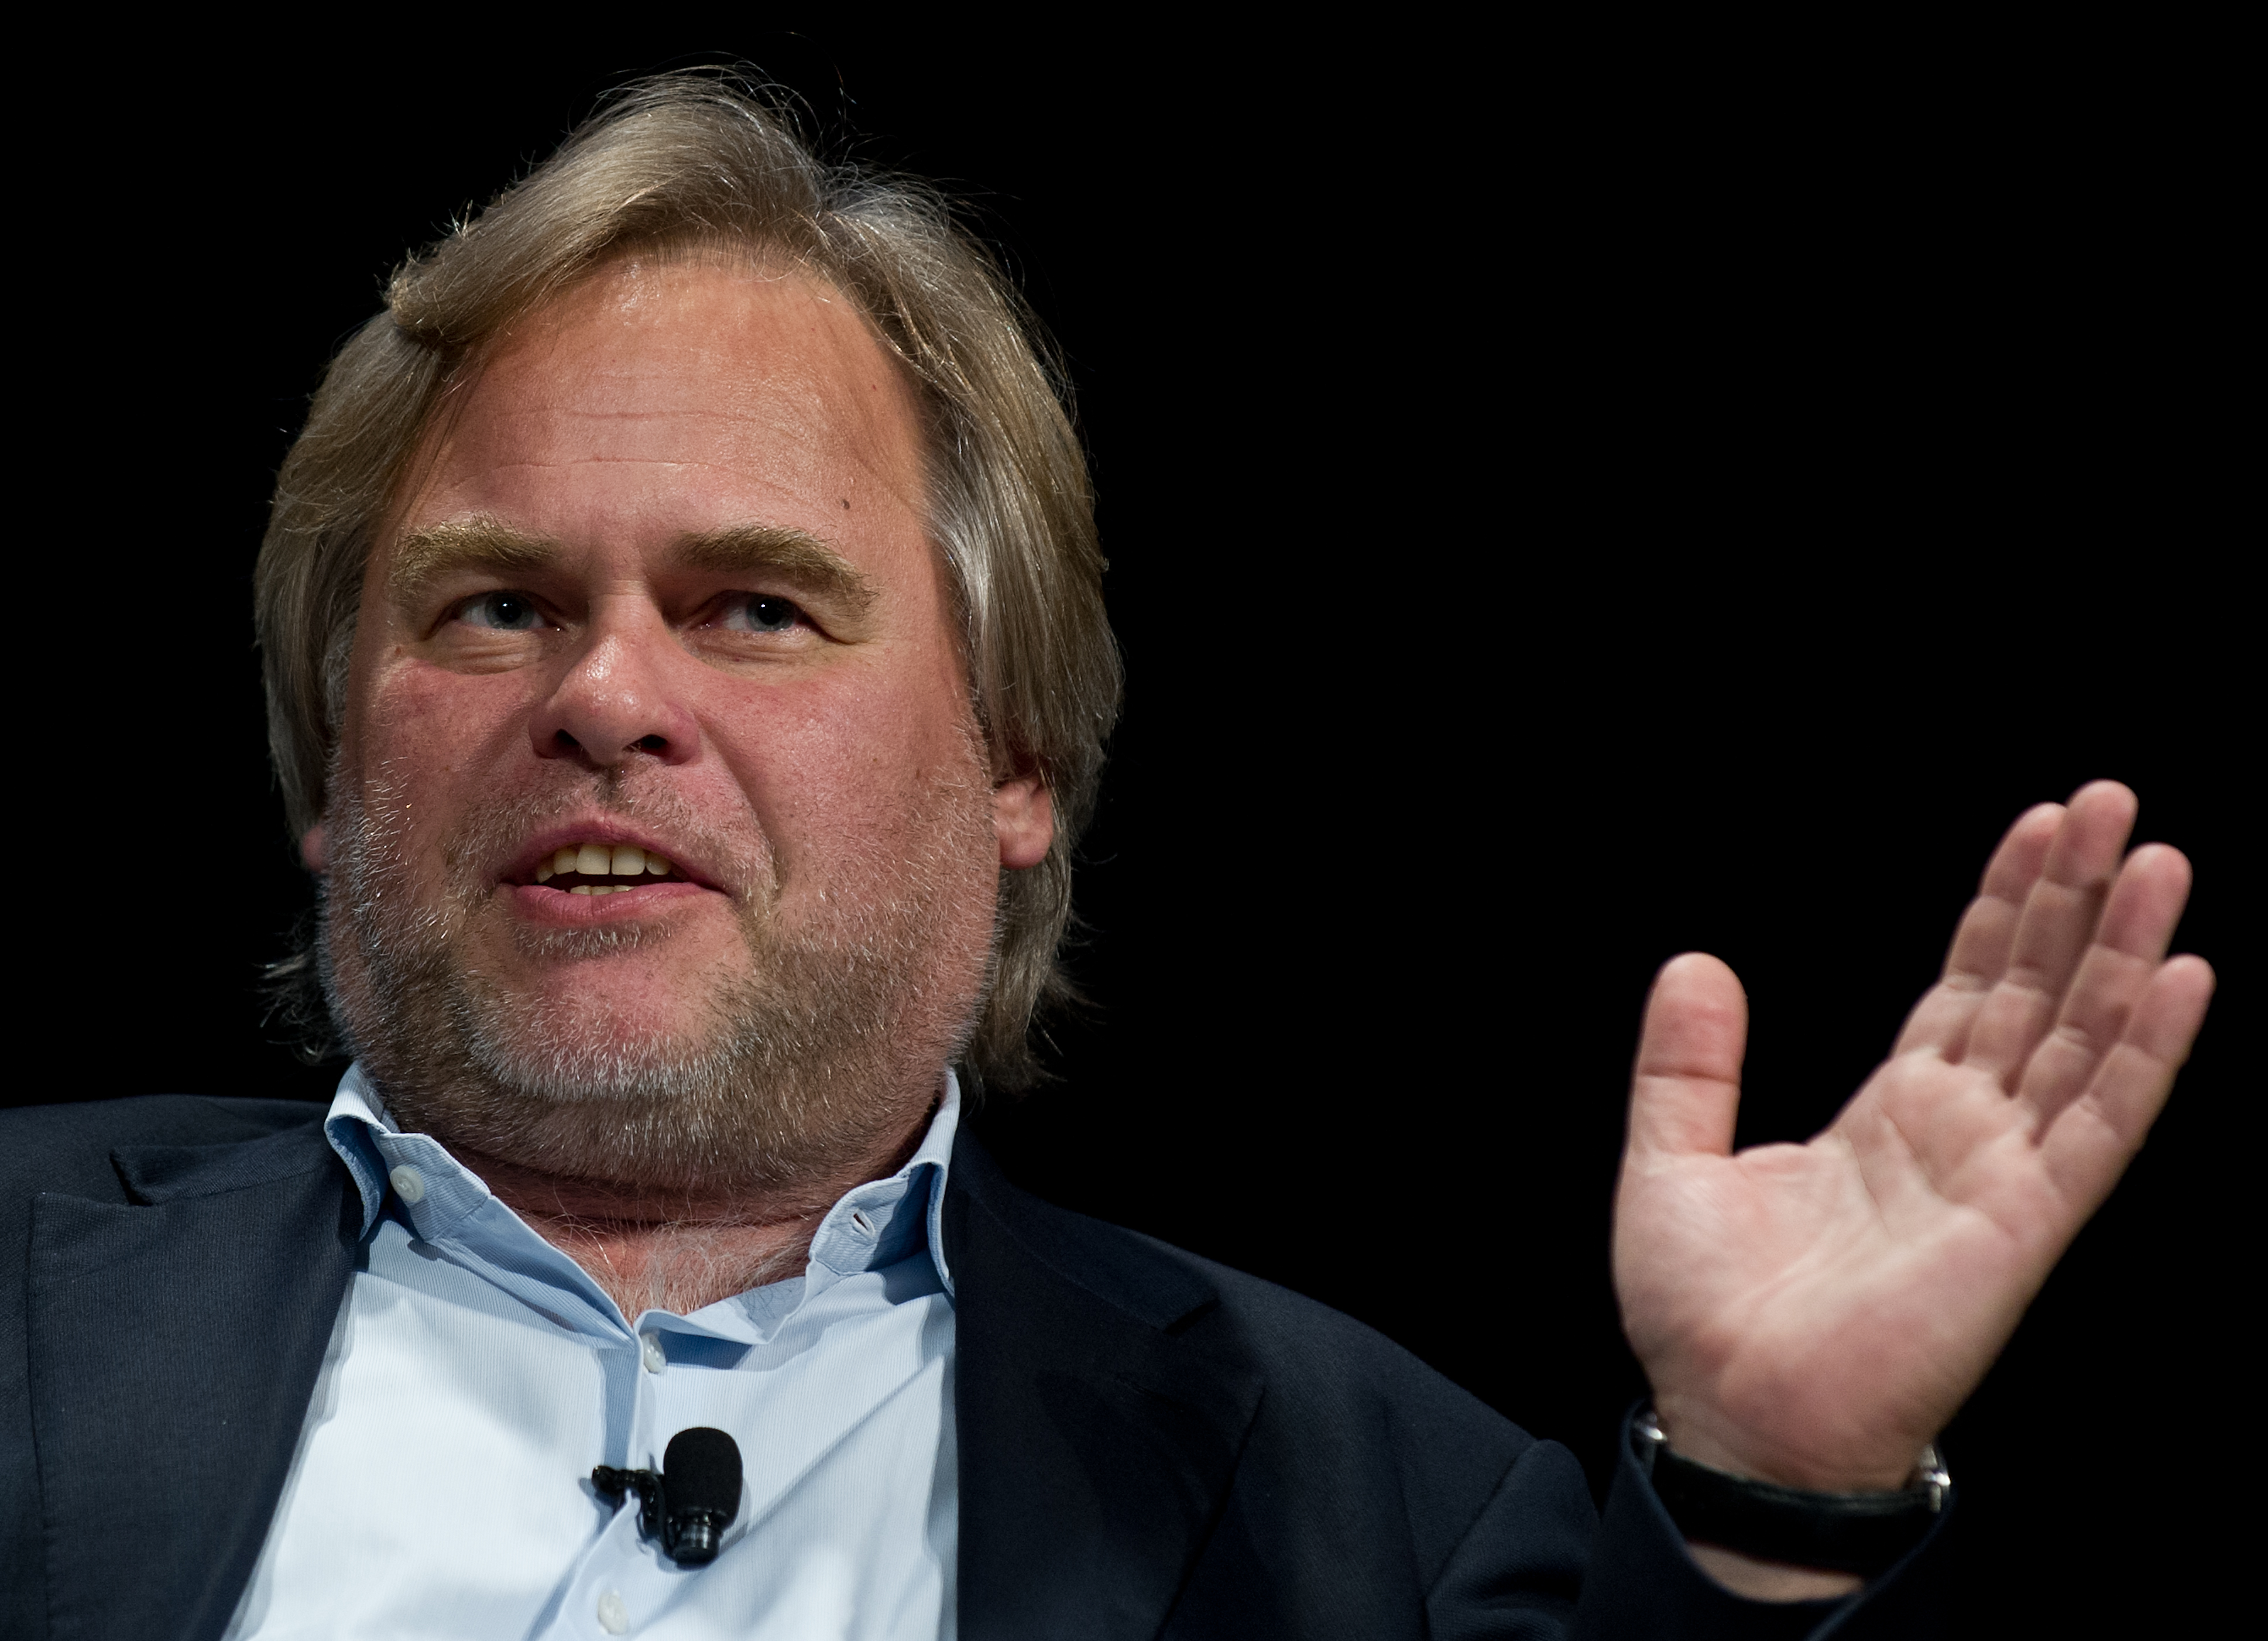 Eugene Kaspersky is major private-sector cybersecurity czar who has to constantly content with allegations that he's tied to the Kremlin. (Photo: Getty)